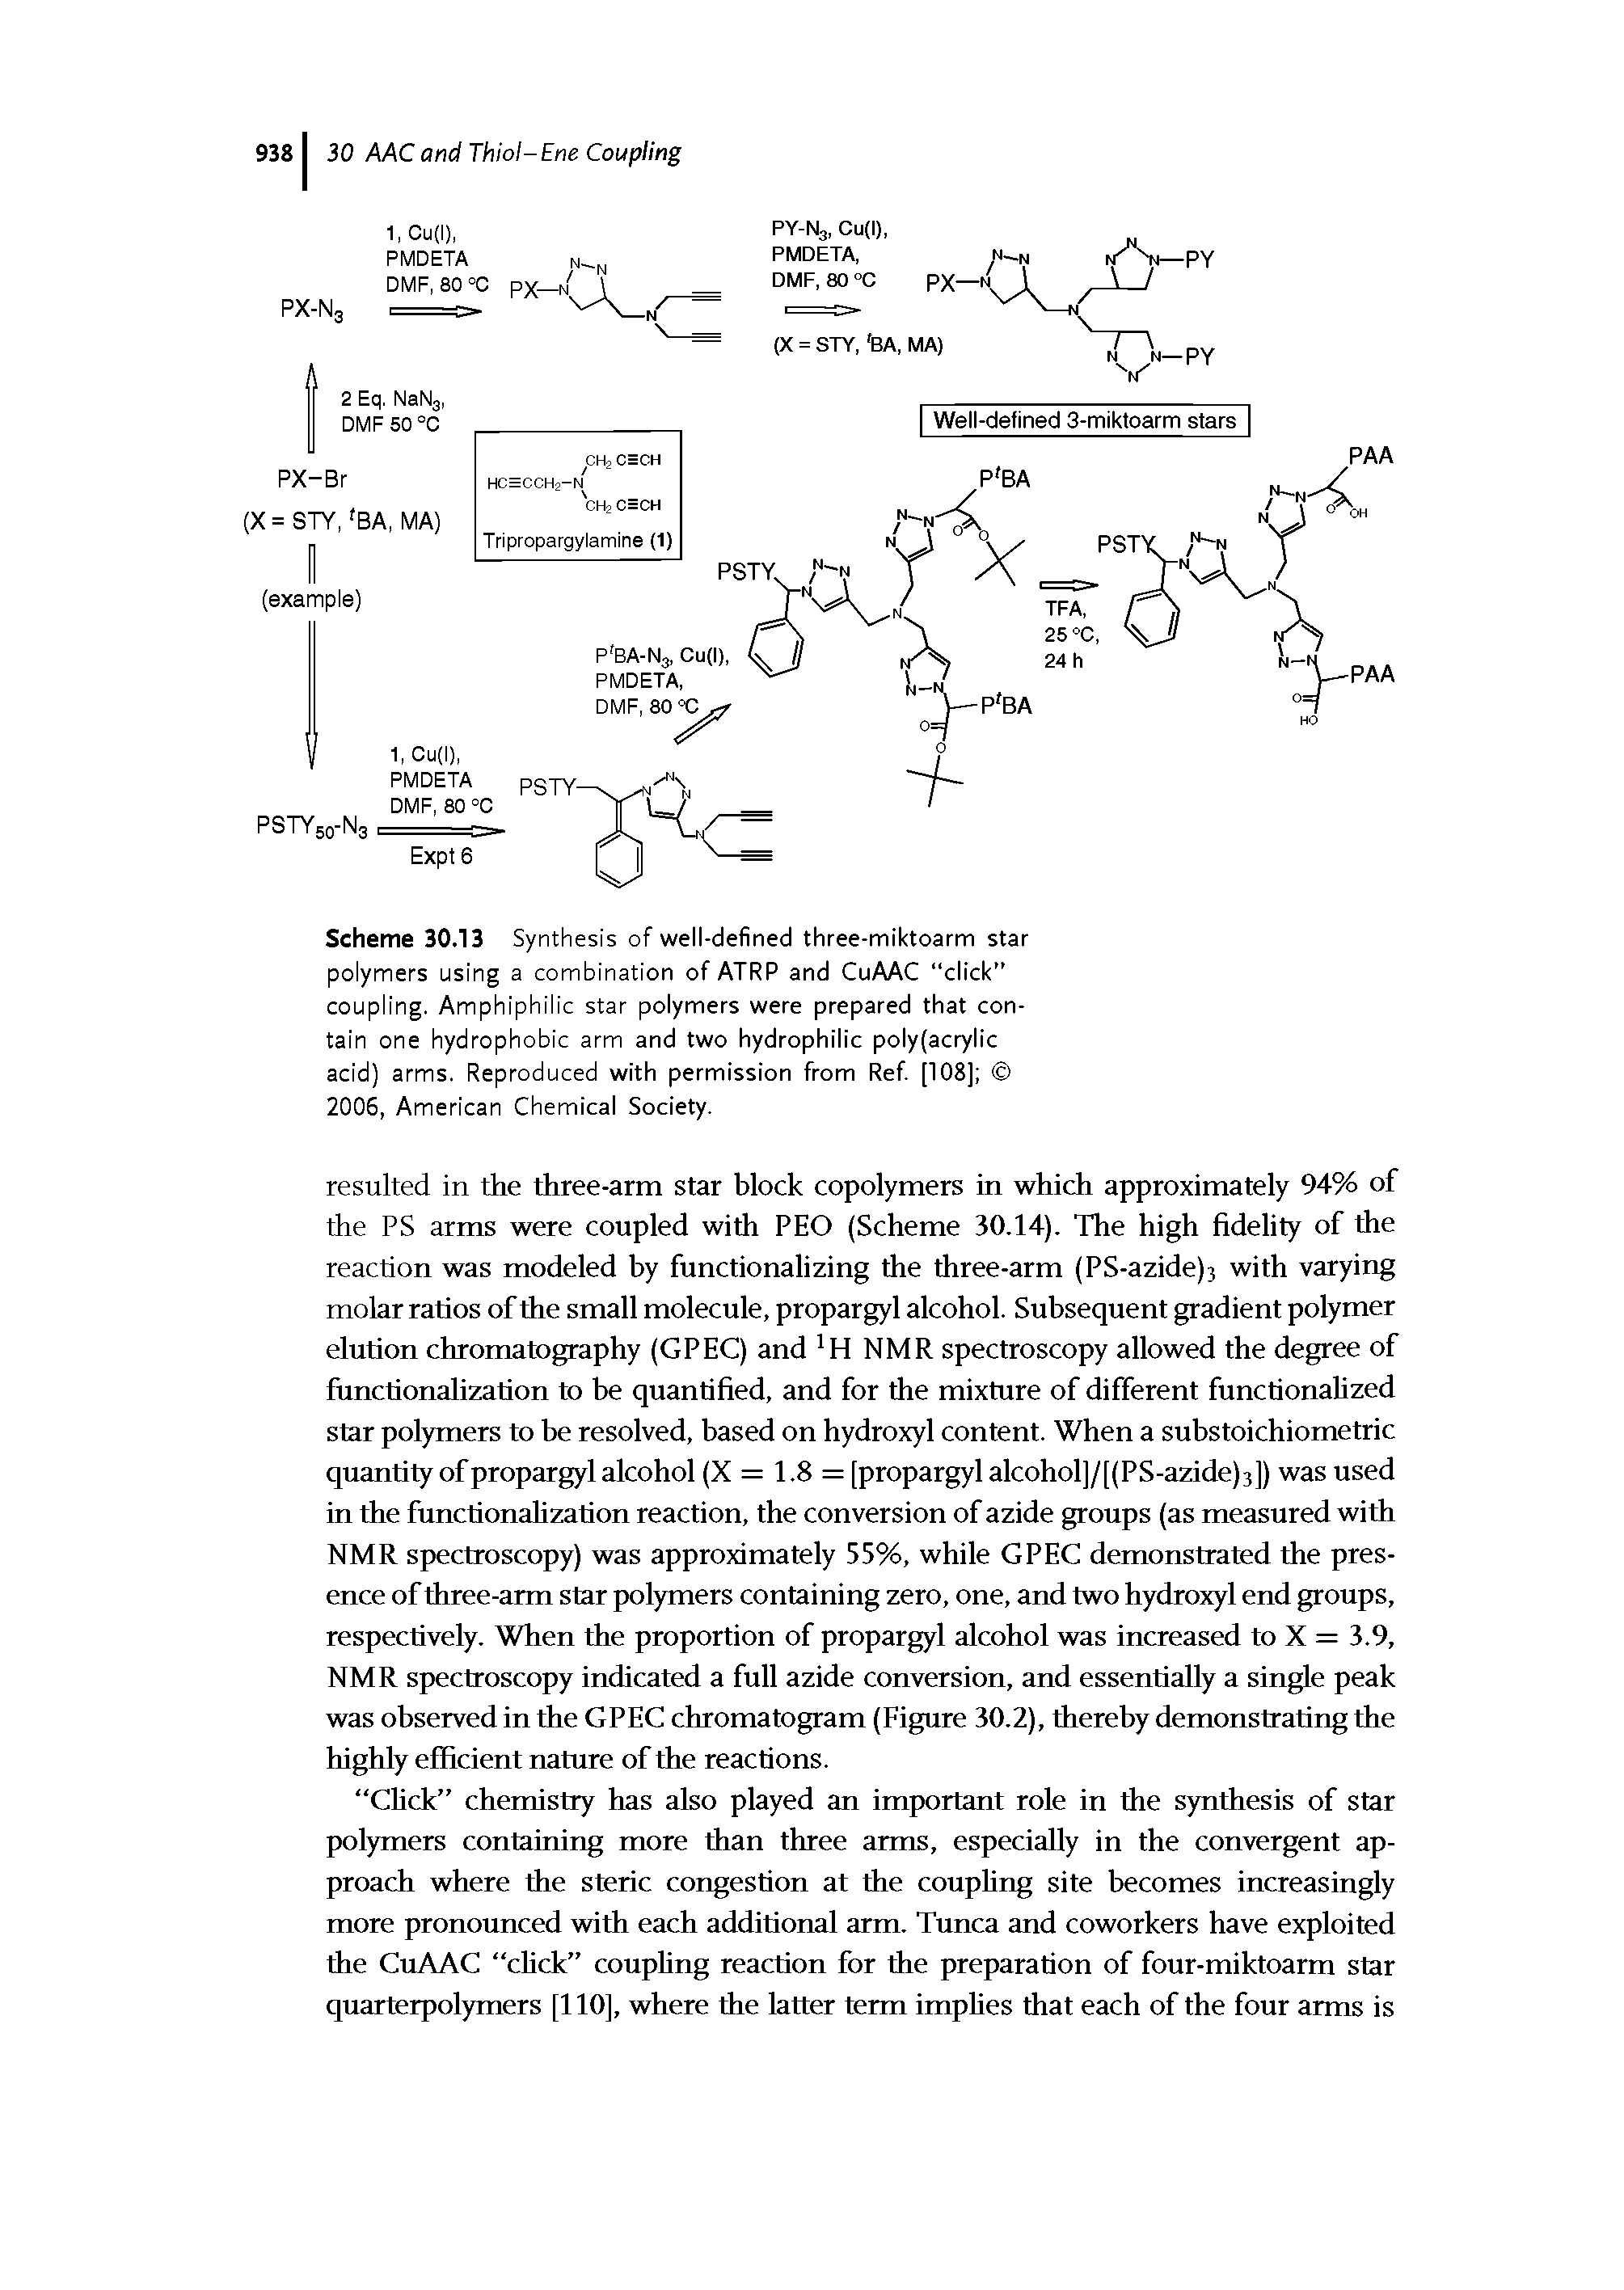 Scheme 30.13 Synthesis of well-defined three-miktoarm star polymers using a combination of ATRP and CuAAC click" coupling. Amphiphilic star polymers were prepared that contain one hydrophobic arm and two hydrophilic poly(acrylic acid) arms. Reproduced with permission from Ref. [108] 2006, American Chemical Society.